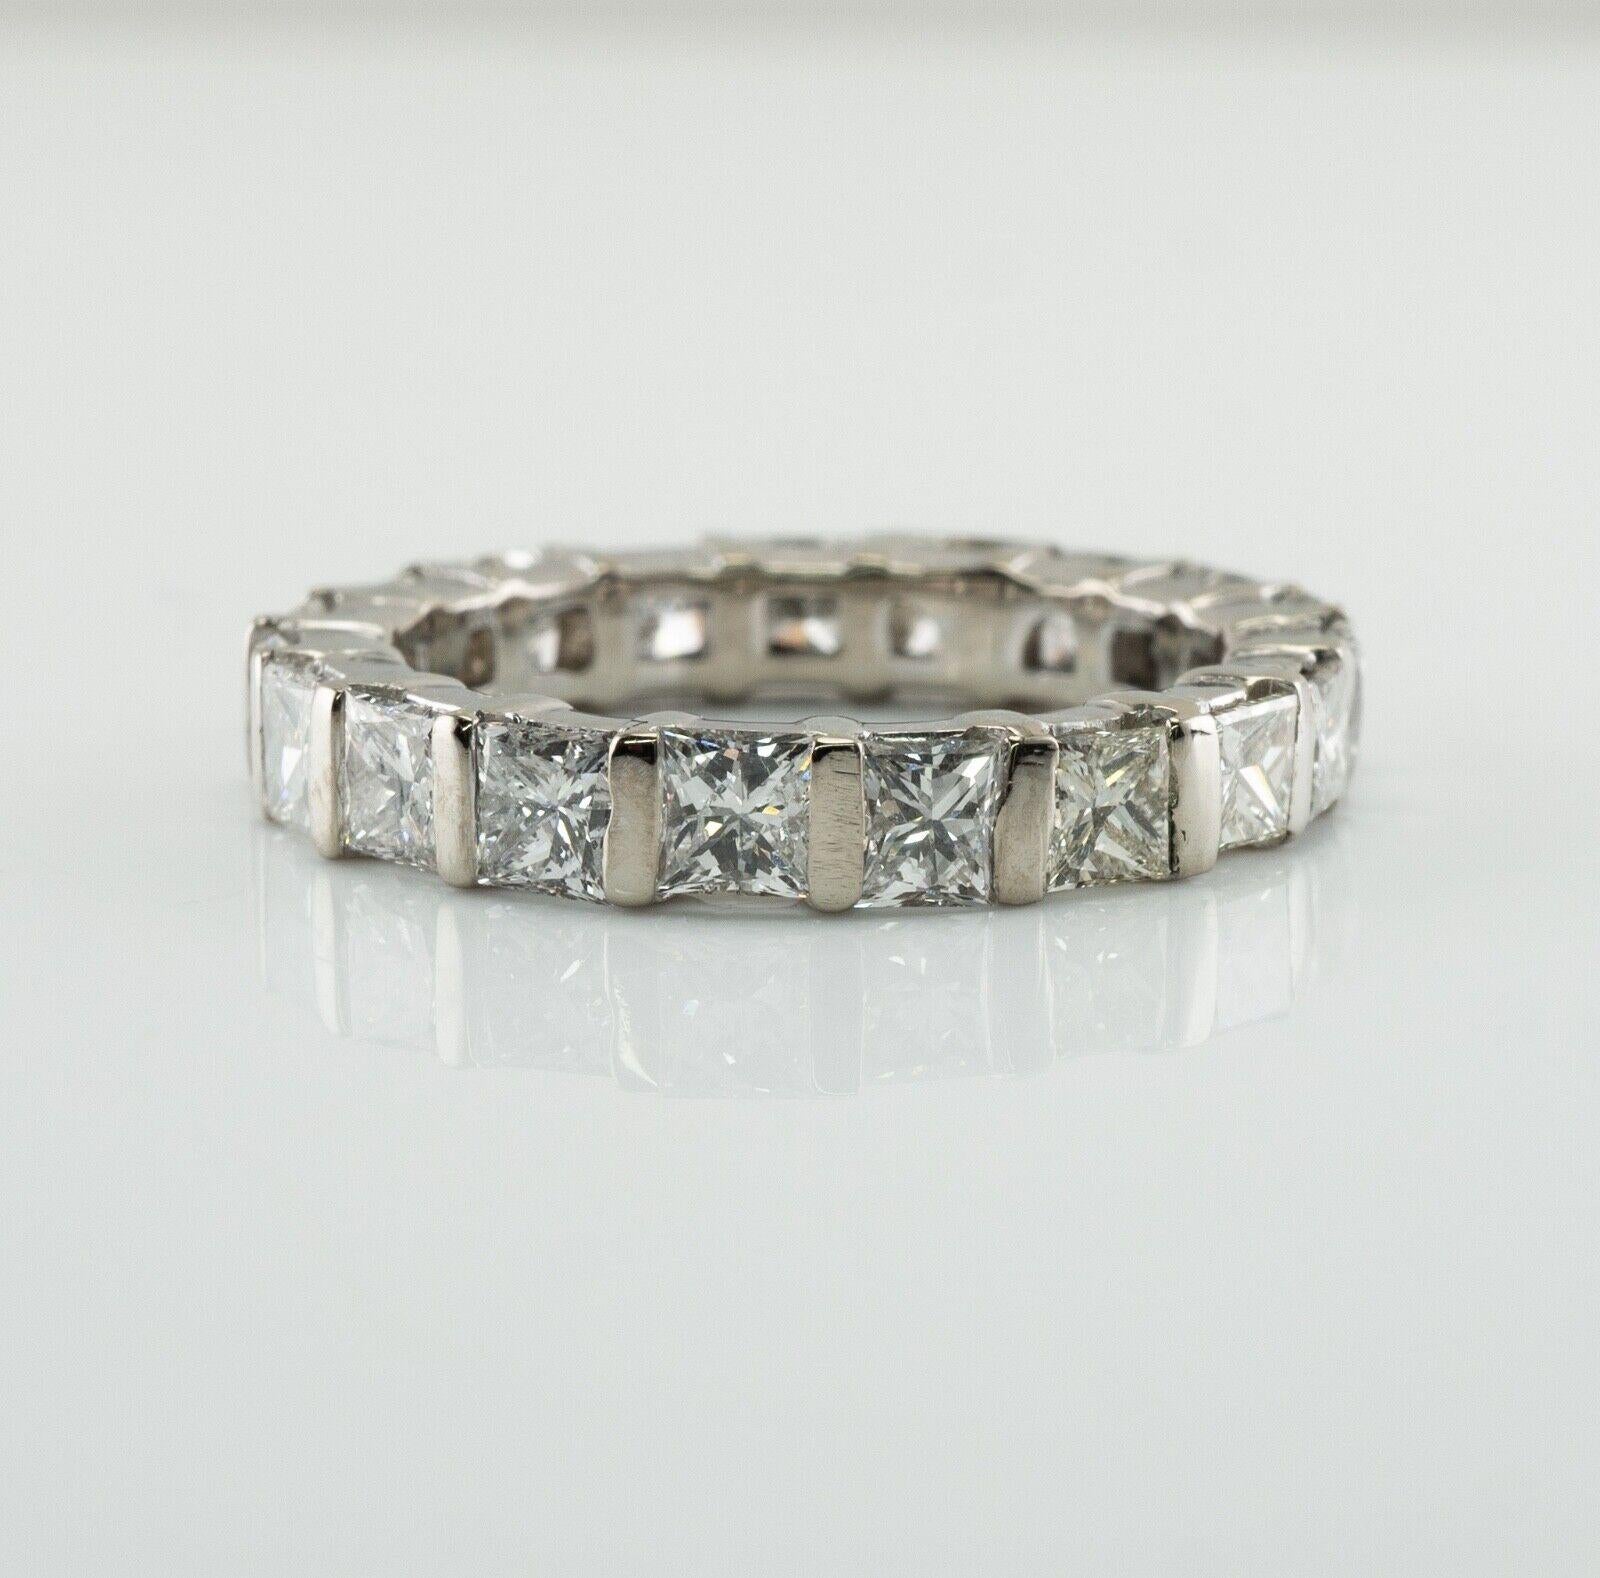 Natural Diamond Ring Geometric 18K White Gold 3.32 TDW

This beautiful estate diamond eternity ring is finely crafted in solid 14K White Gold (carefully tested and guaranteed) and set with nineteen square-cut diamonds. All diamonds go around, no